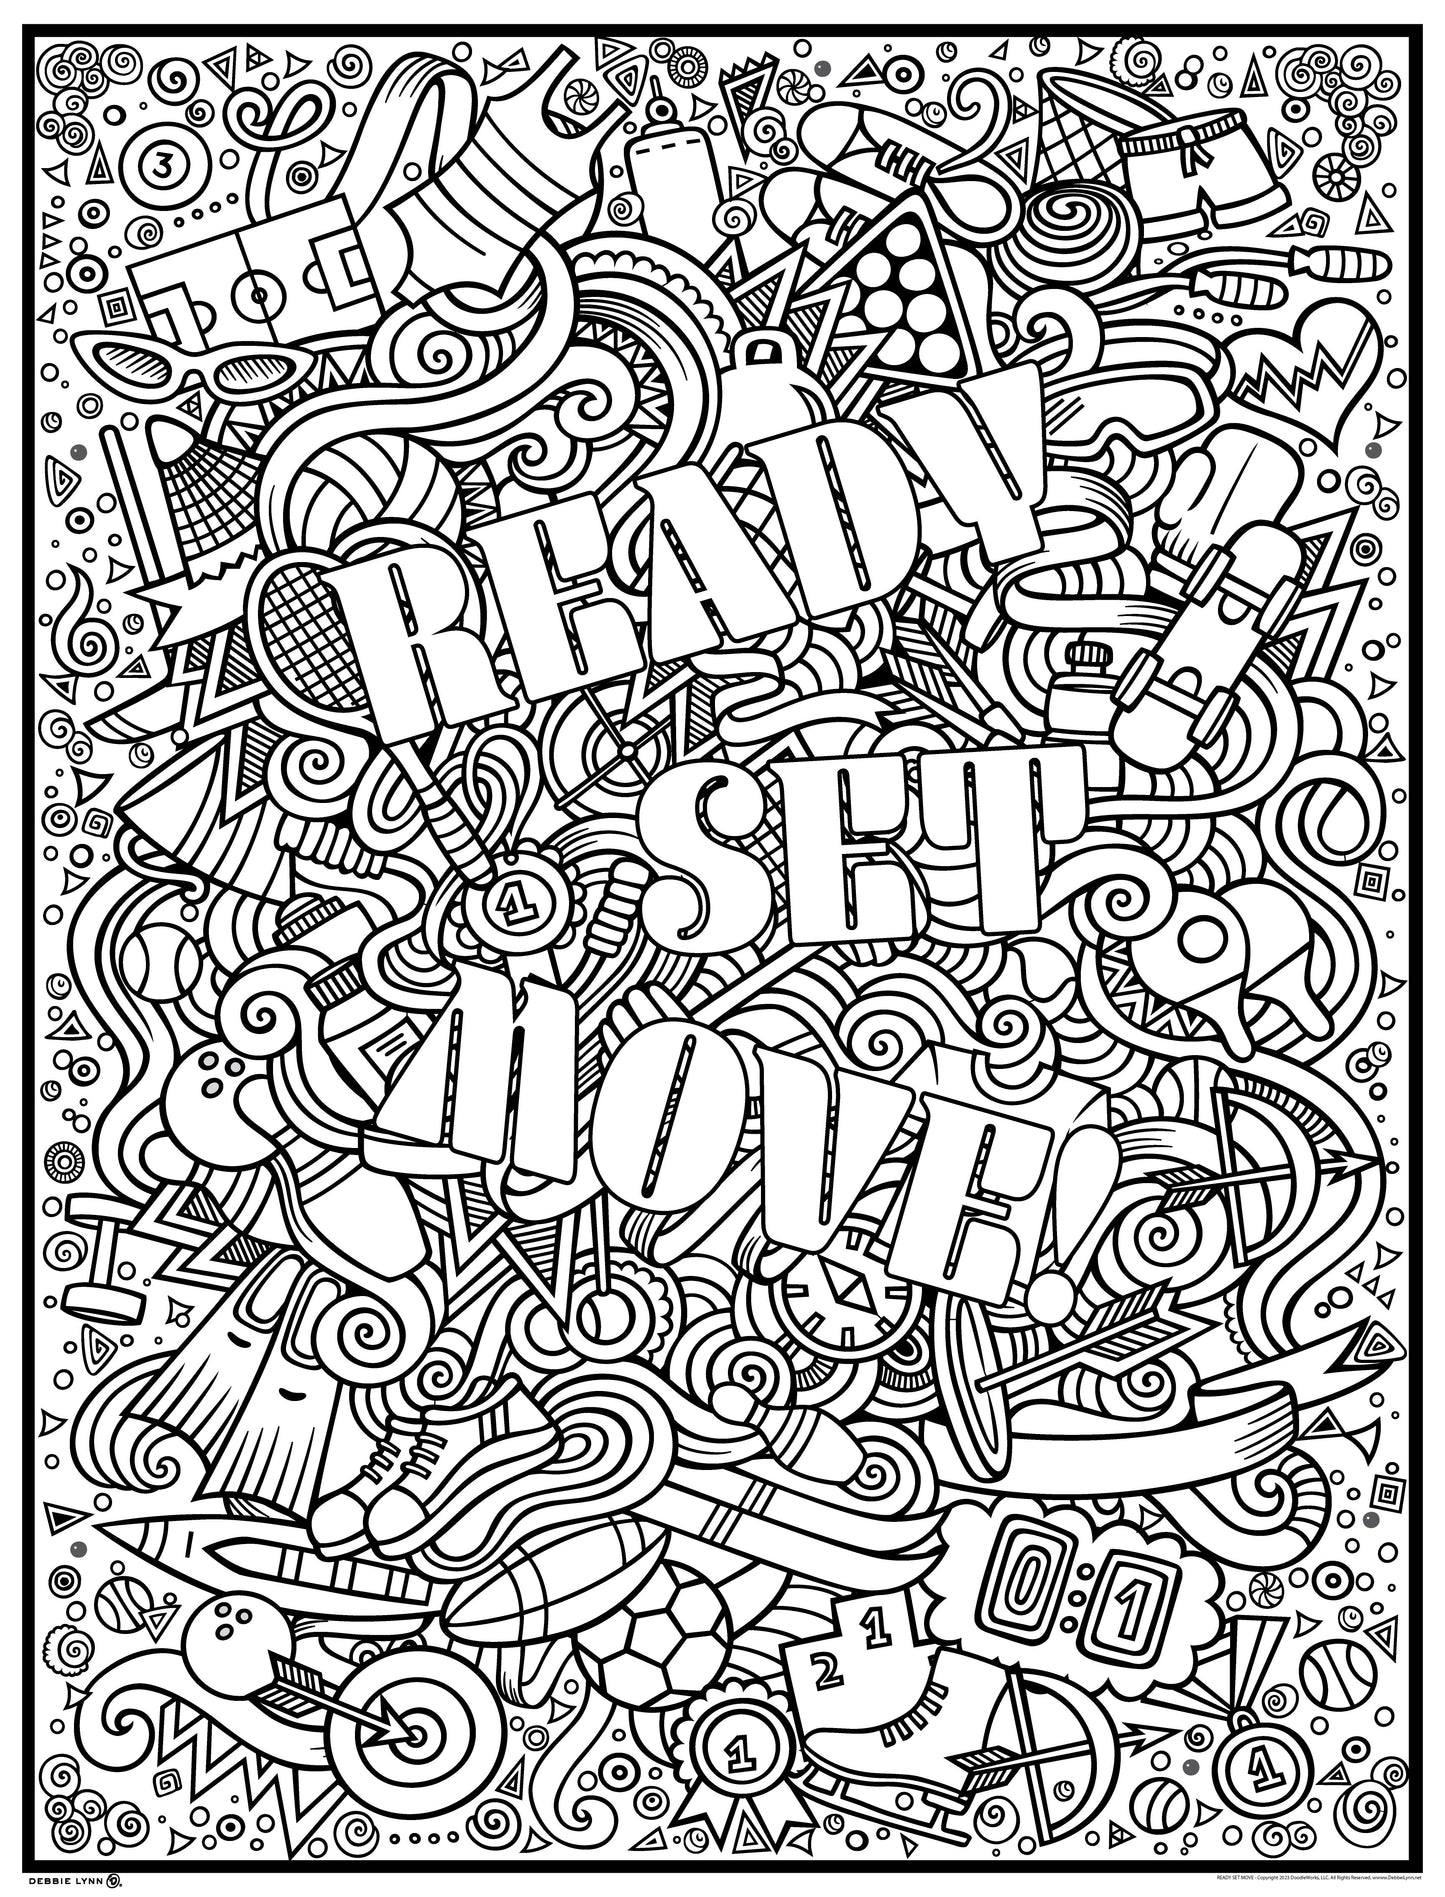 READY SET MOVE VBS FAITH PERSONALIZED GIANT COLORING POSTER 46"x60"